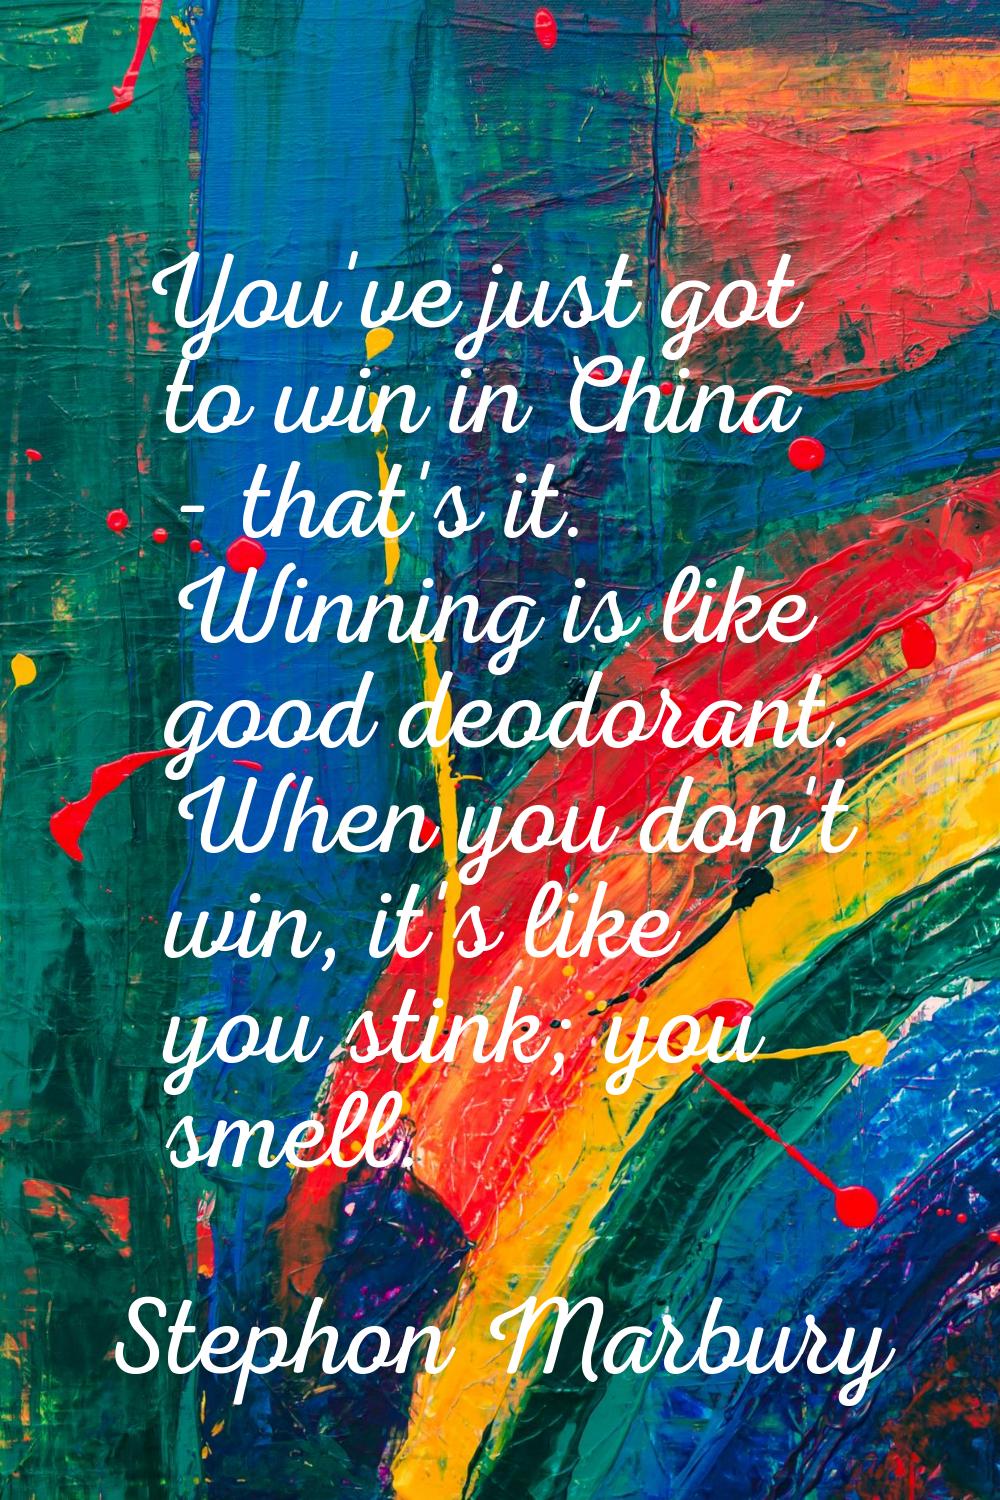 You've just got to win in China - that's it. Winning is like good deodorant. When you don't win, it